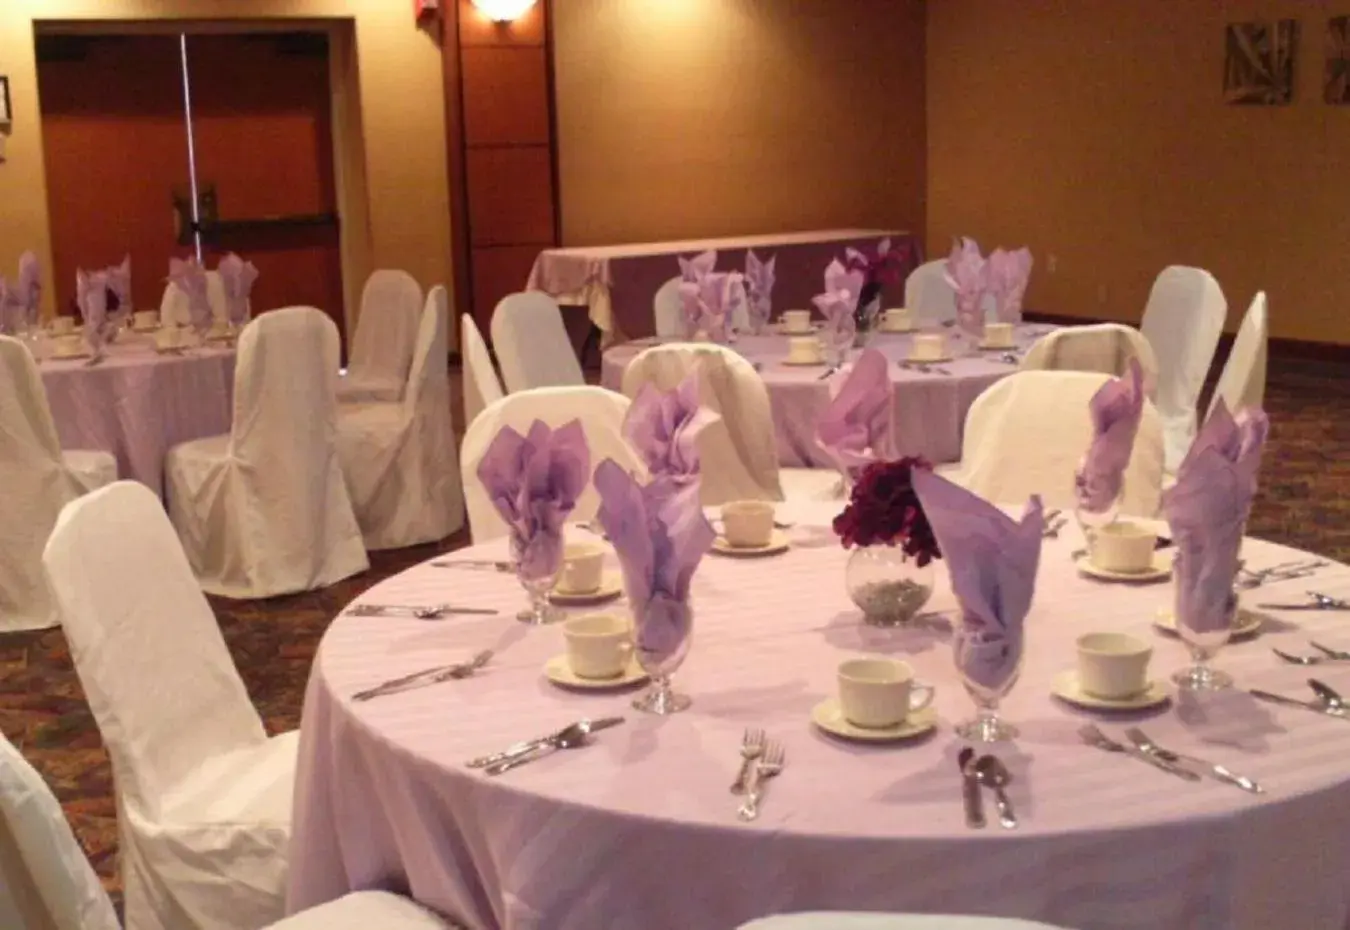 Banquet/Function facilities, Banquet Facilities in Hudson Valley Hotel and Conference Center by Fairbridge